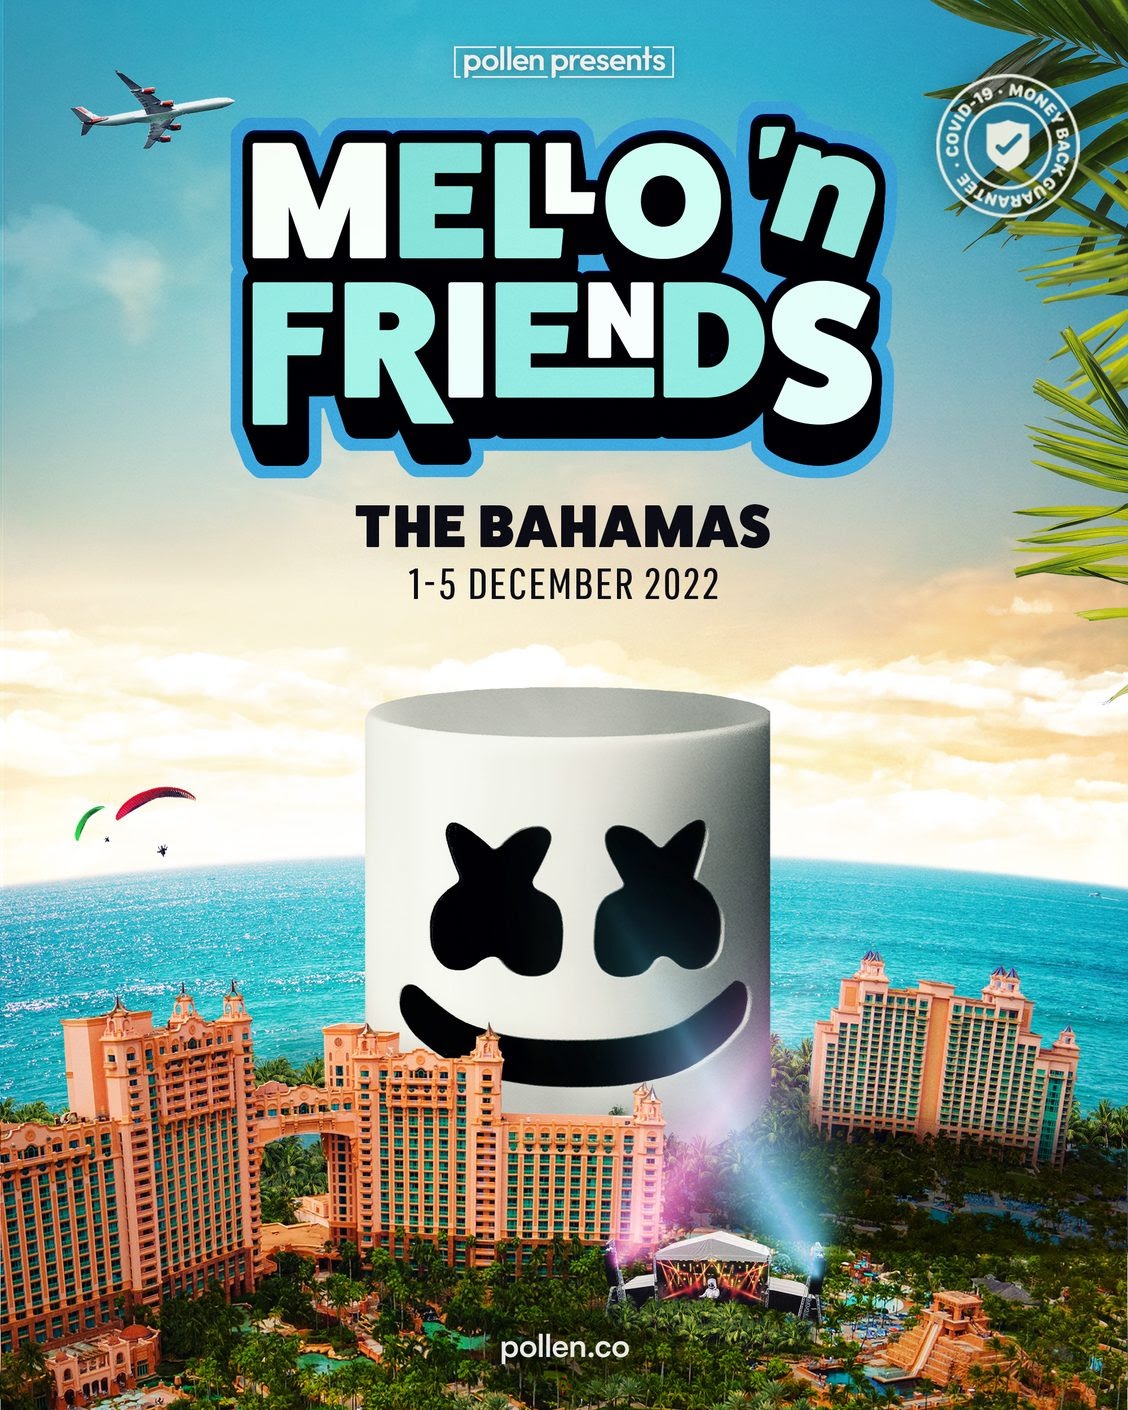 Pollen Presents and Marshmello Announce Mello N Friends In The Bahamas